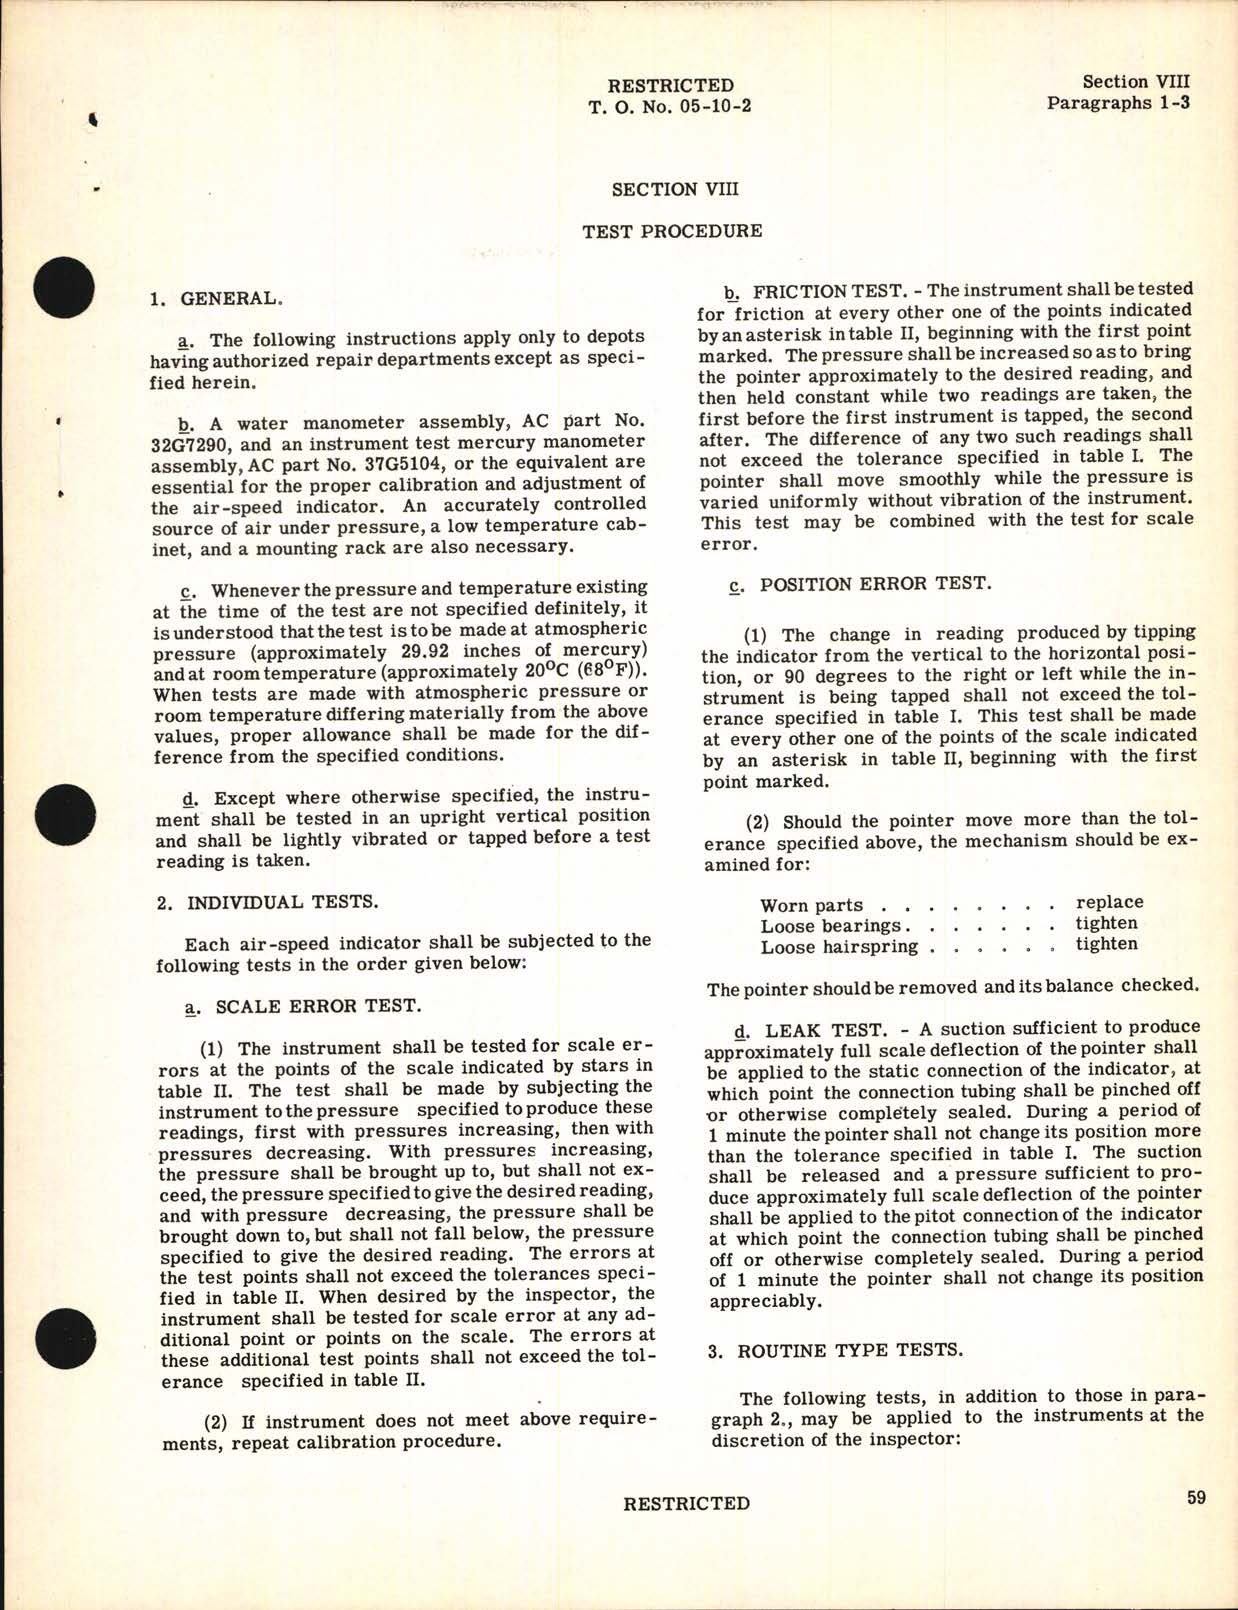 Sample page 7 from AirCorps Library document: Handbook of Instructions for Air-Speed Indicators